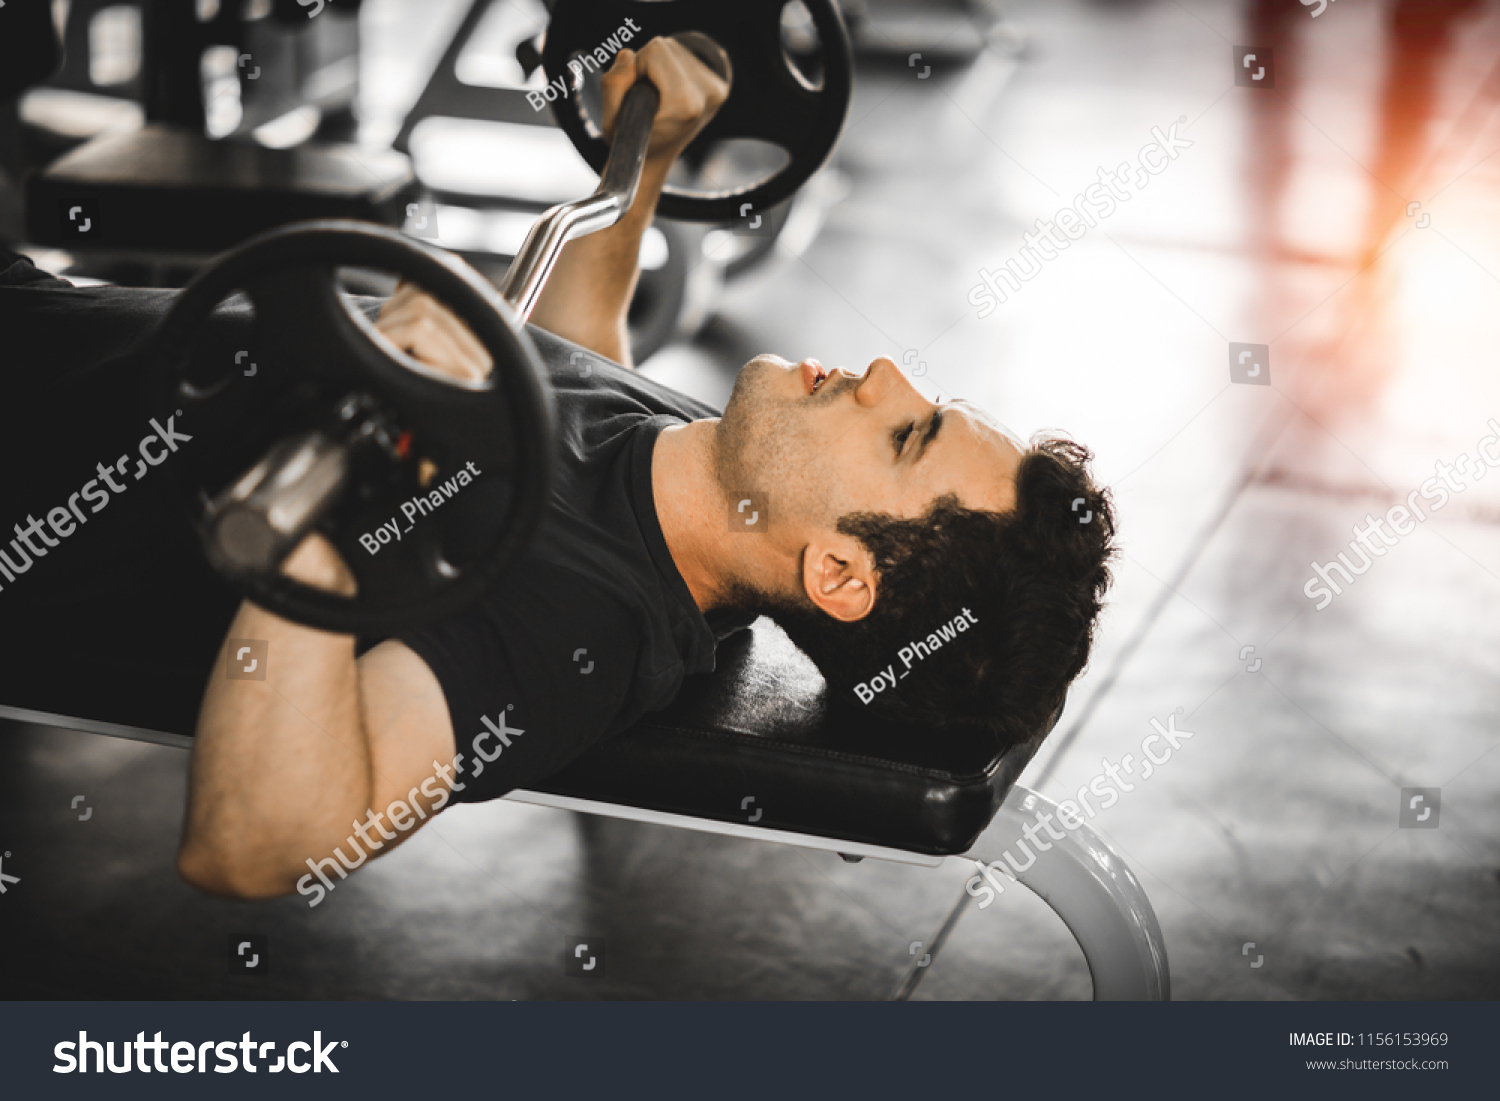 Fit caucasian handsome young man and big muscle in sportswear. Young man holding dumbbell during an exercise class in a gym. Healthy sports lifestyle, Fitness concept. with copy space for your text. #1156153969